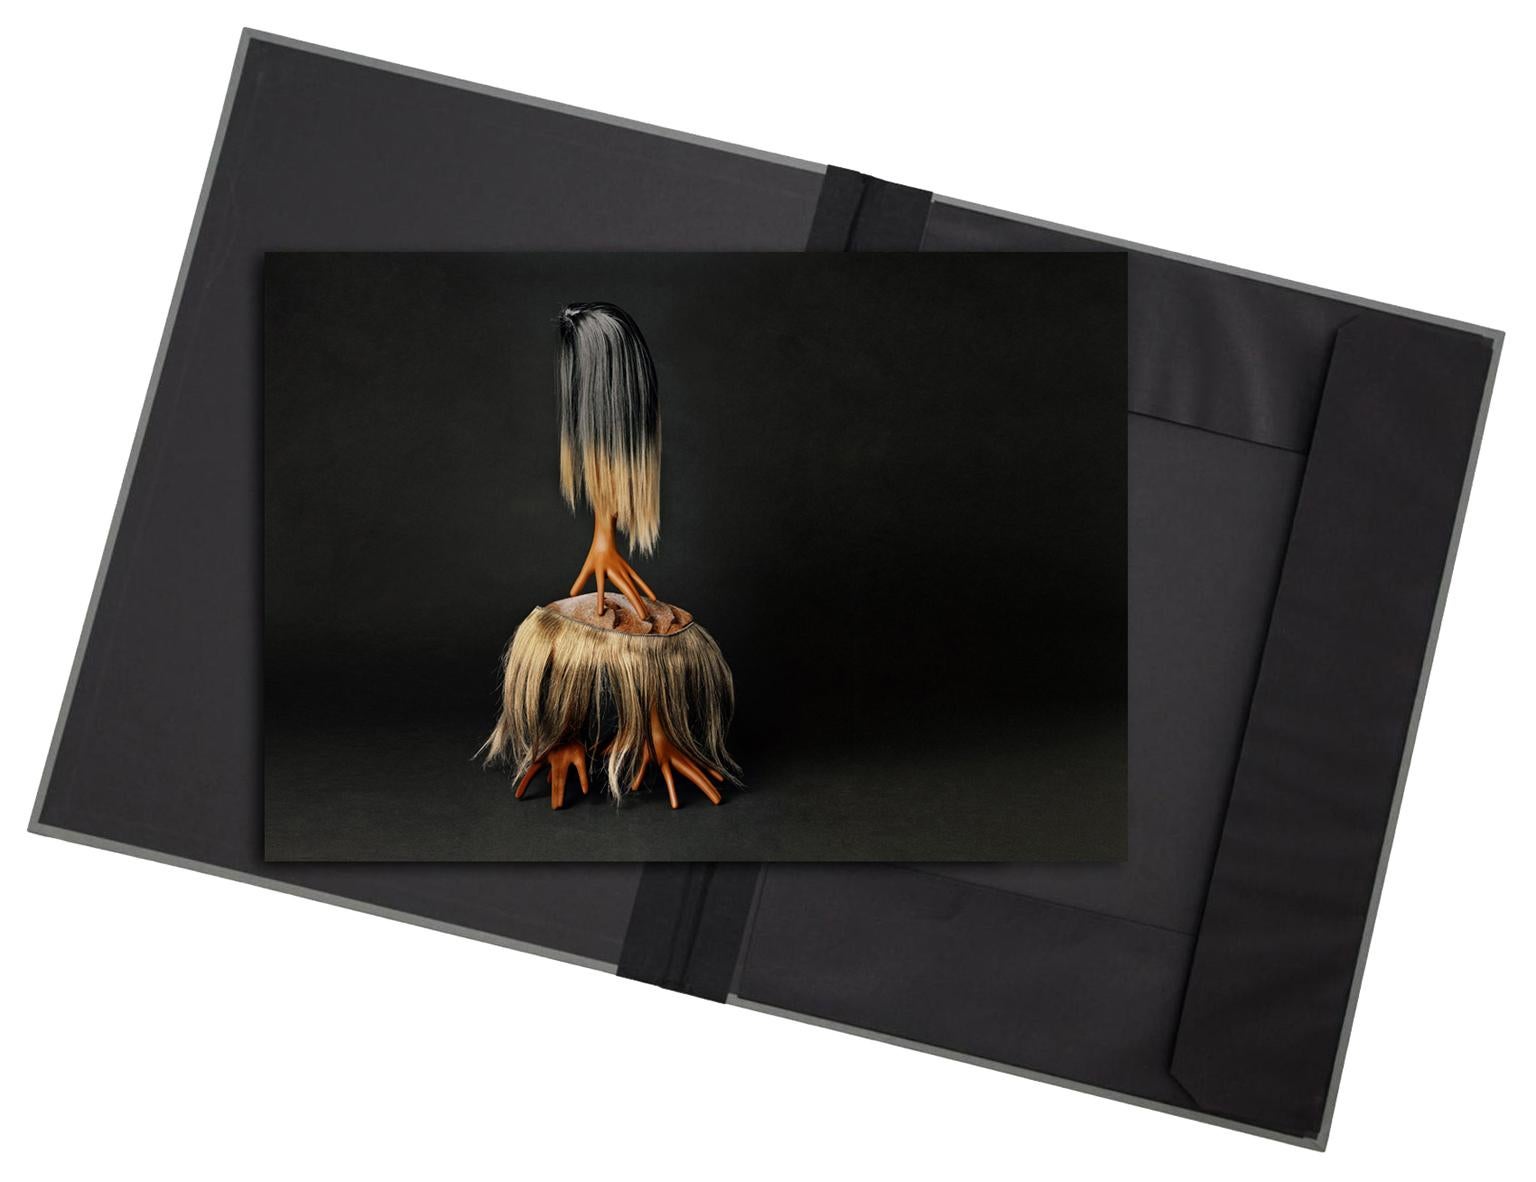 Creature III - limited edition photograph in archival portfolio gift binder - Photograph by Christian Stoll